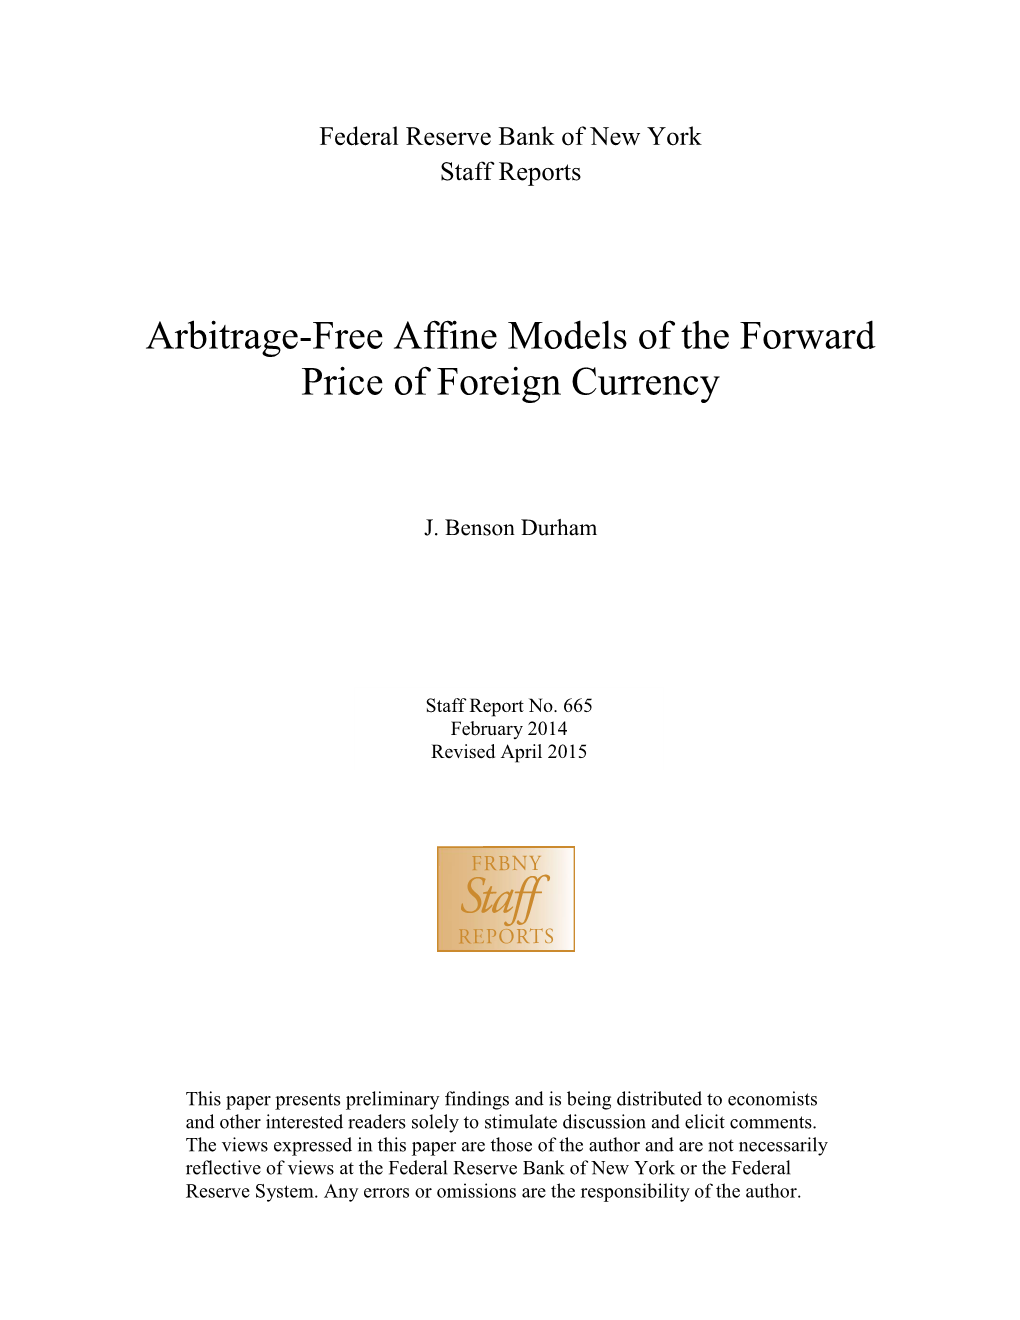 Arbitrage-Free Affine Models of the Forward Price of Foreign Currency